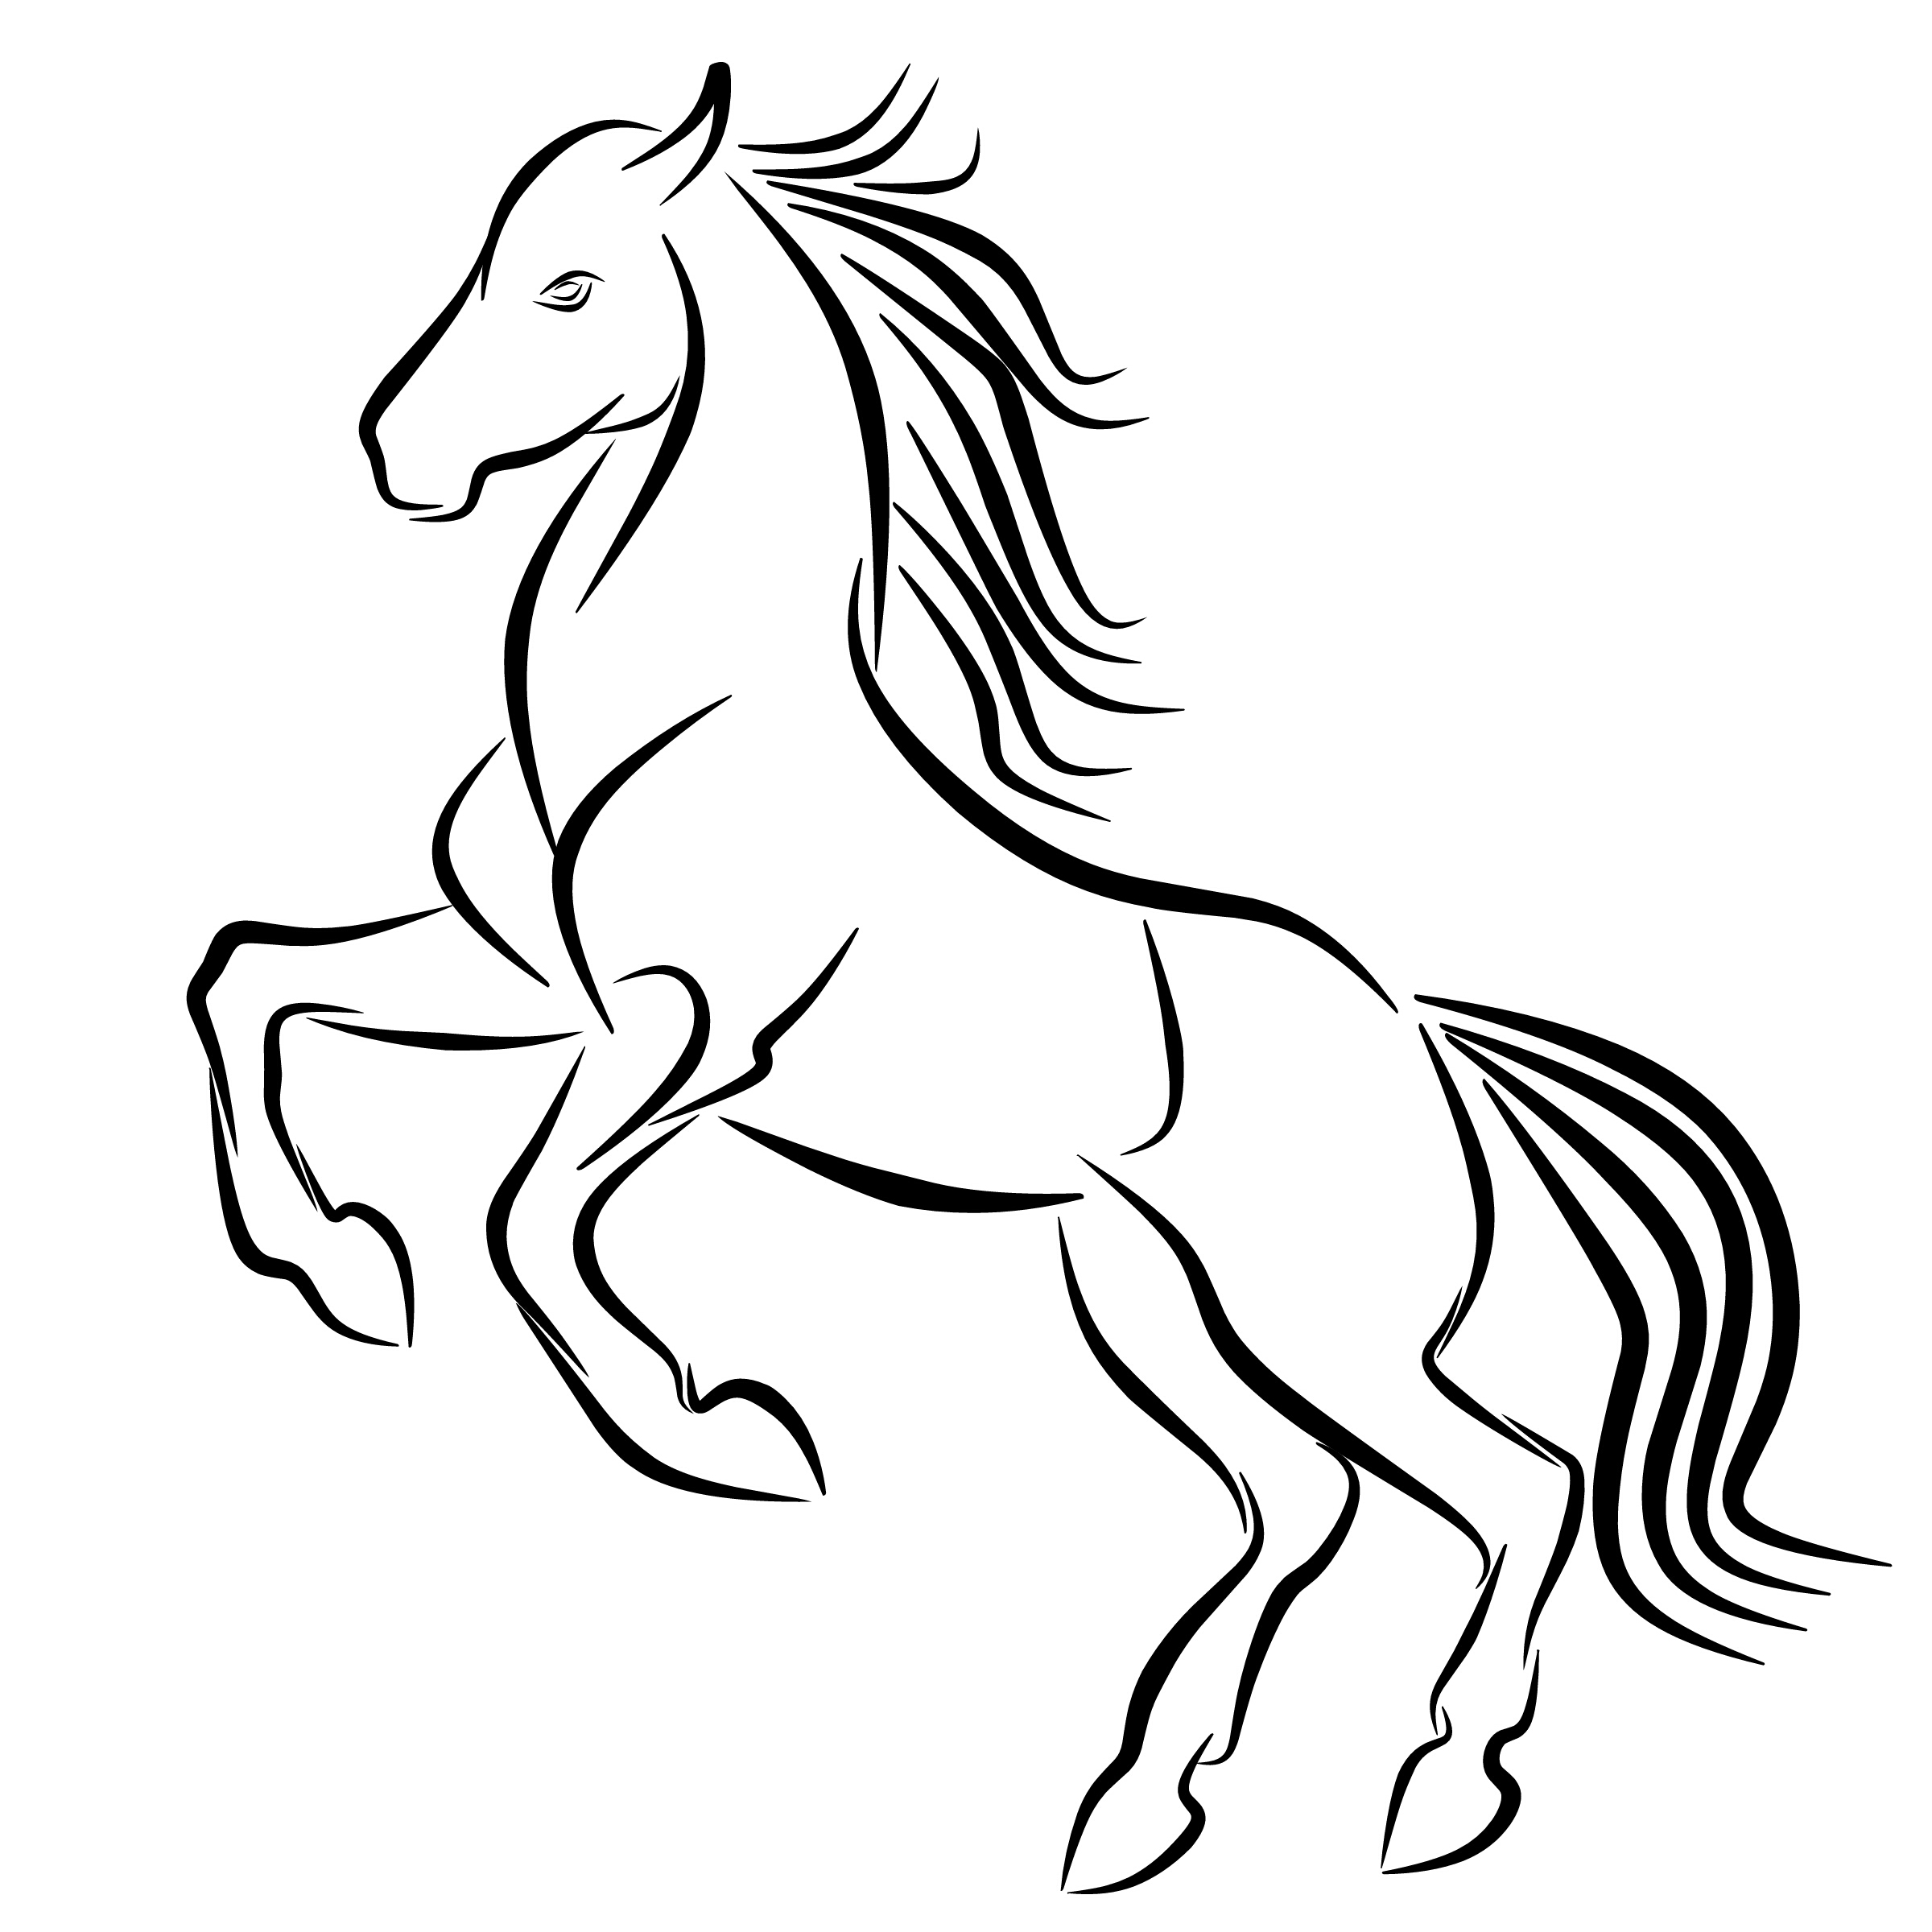 How To Draw A Mustang Horse Simple Horse Drawing Bilscreen This